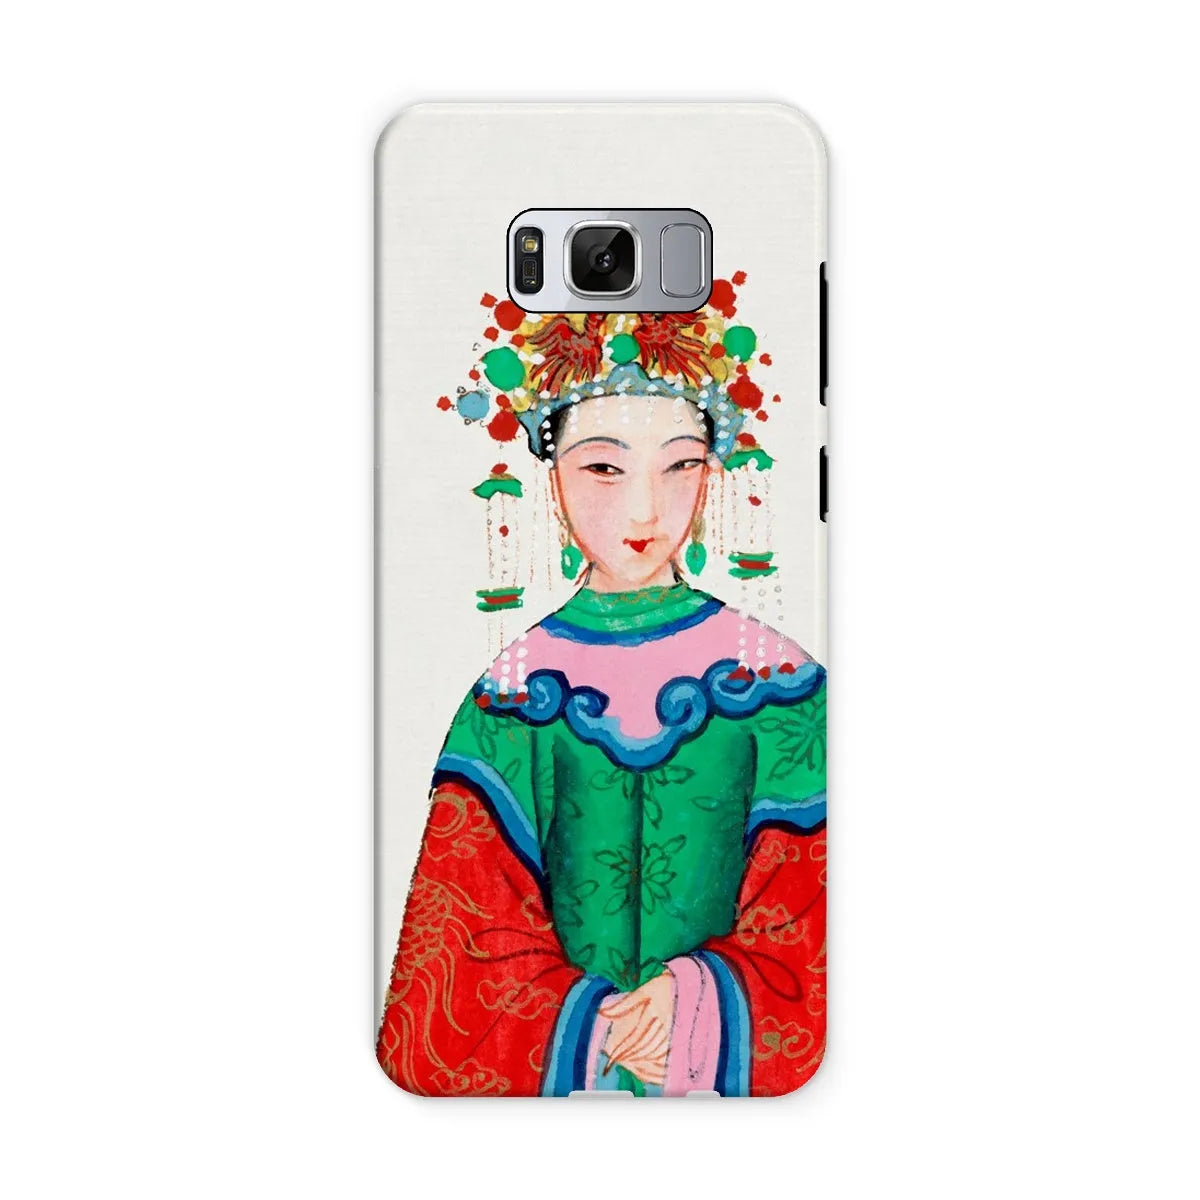 Imperial Princess - Chinese Aesthetic Painting Phone Case - Samsung Galaxy S8 / Matte - Mobile Phone Cases - Aesthetic